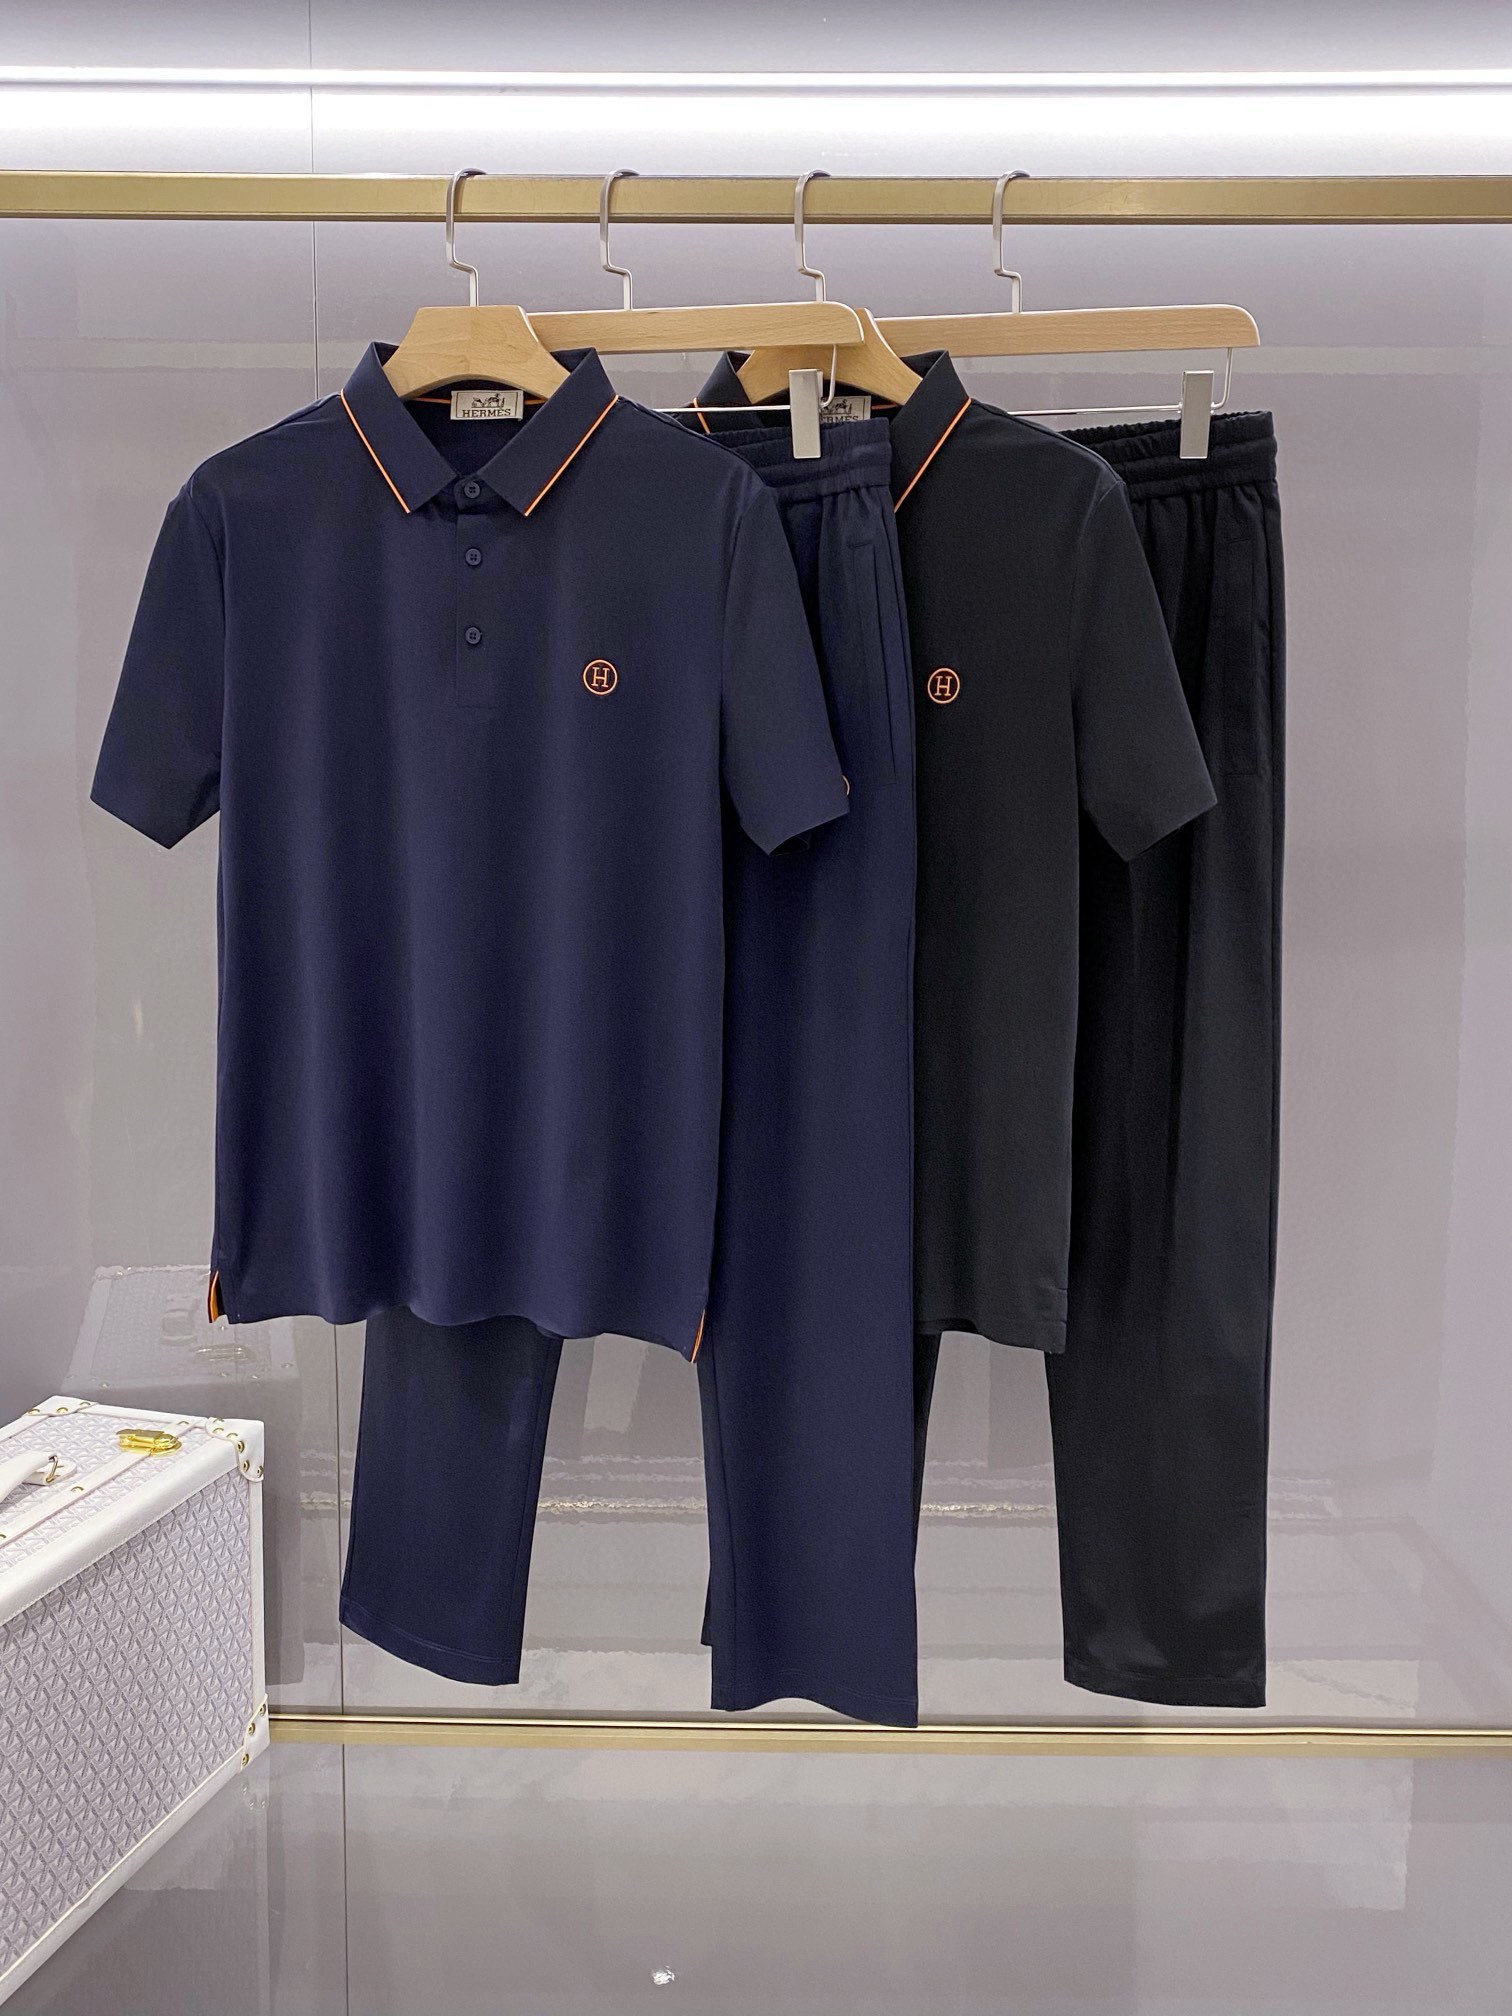 Hermes Clothing Pants & Trousers Shirts & Blouses T-Shirt Two Piece Outfits & Matching Sets Black Blue Orange Embroidery Men Spandex Spring/Summer Collection Fashion Short Sleeve